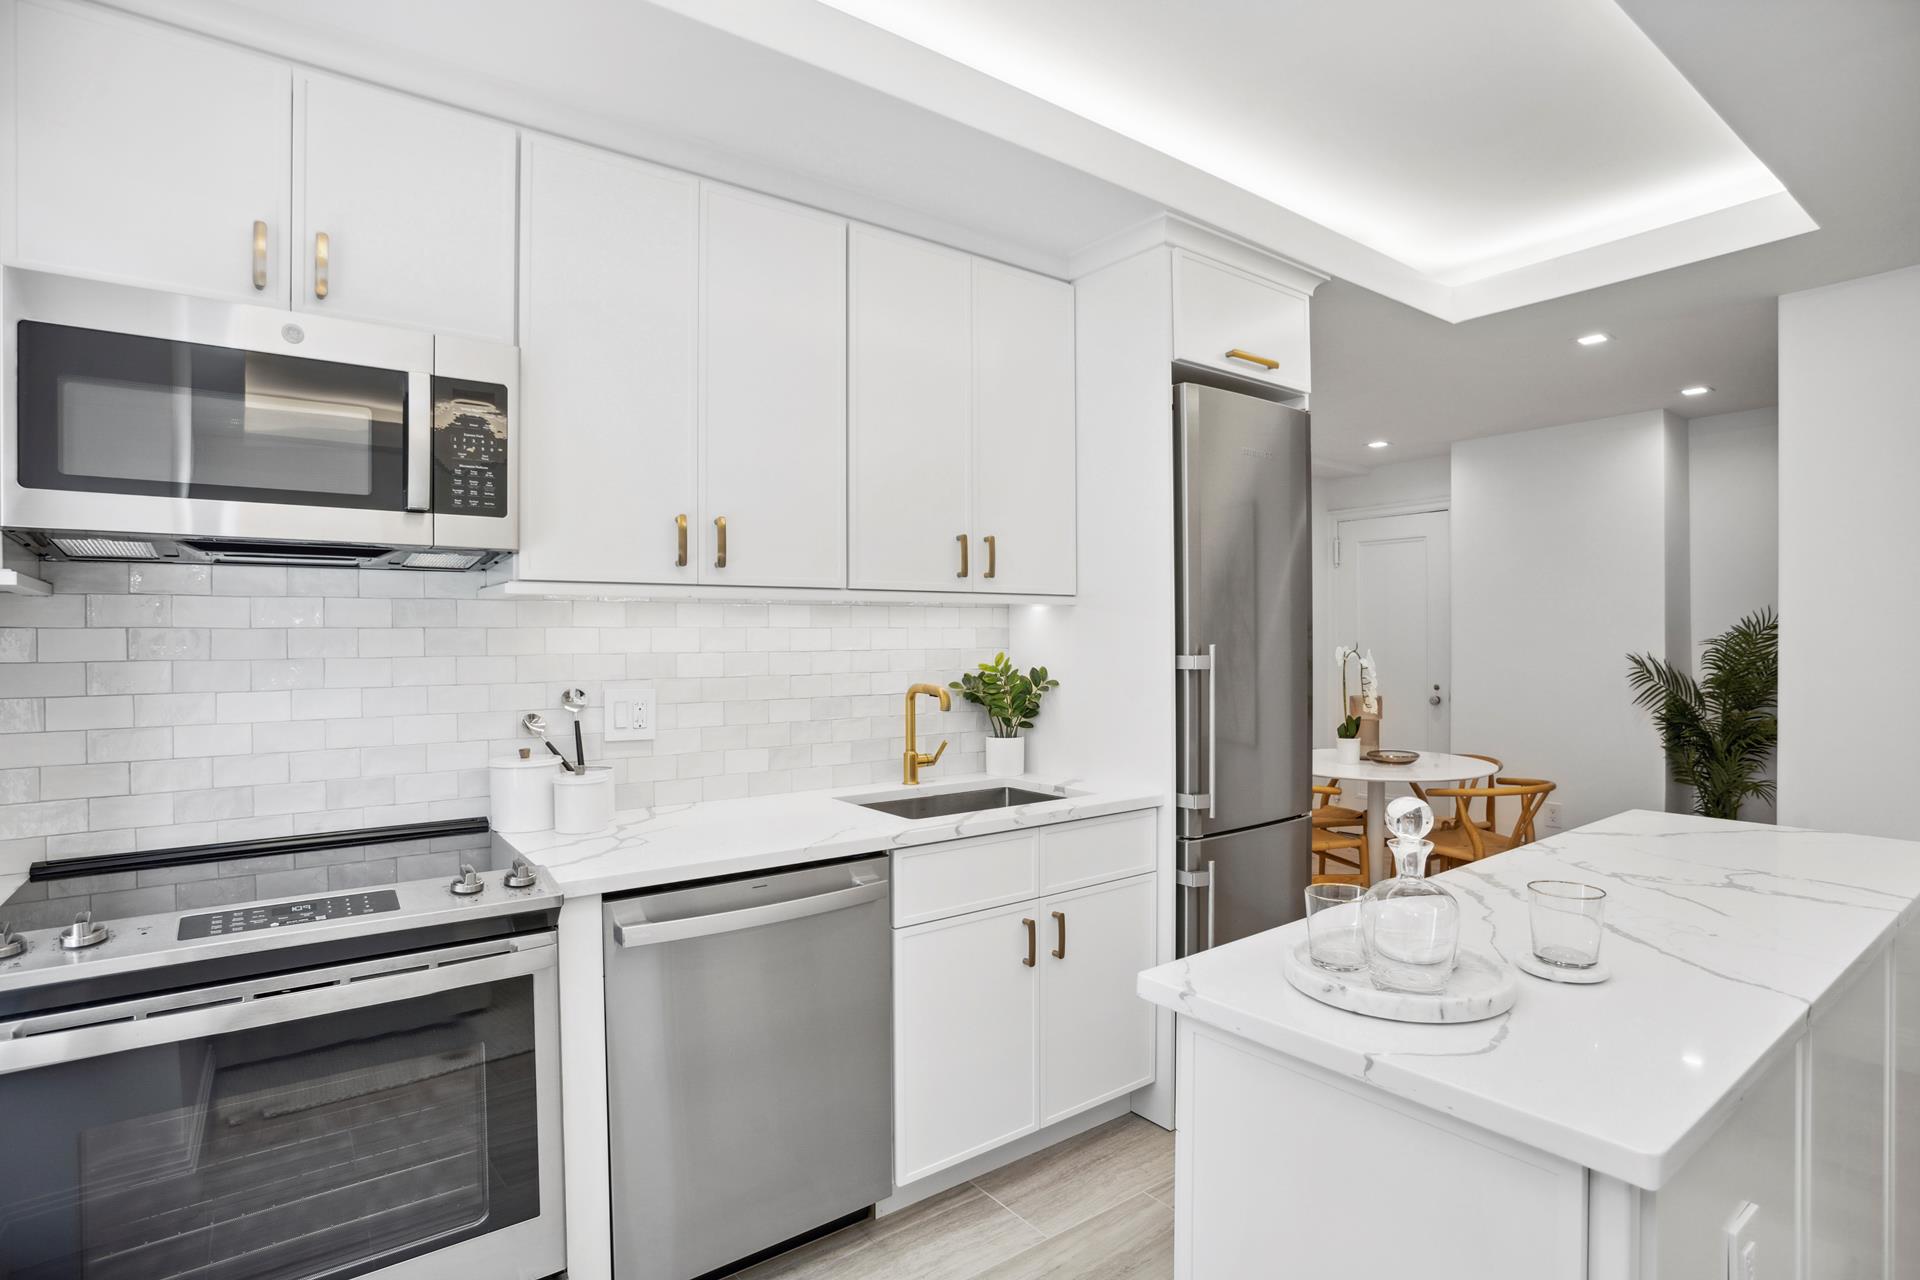 a kitchen with stainless steel appliances white cabinets and wooden floors